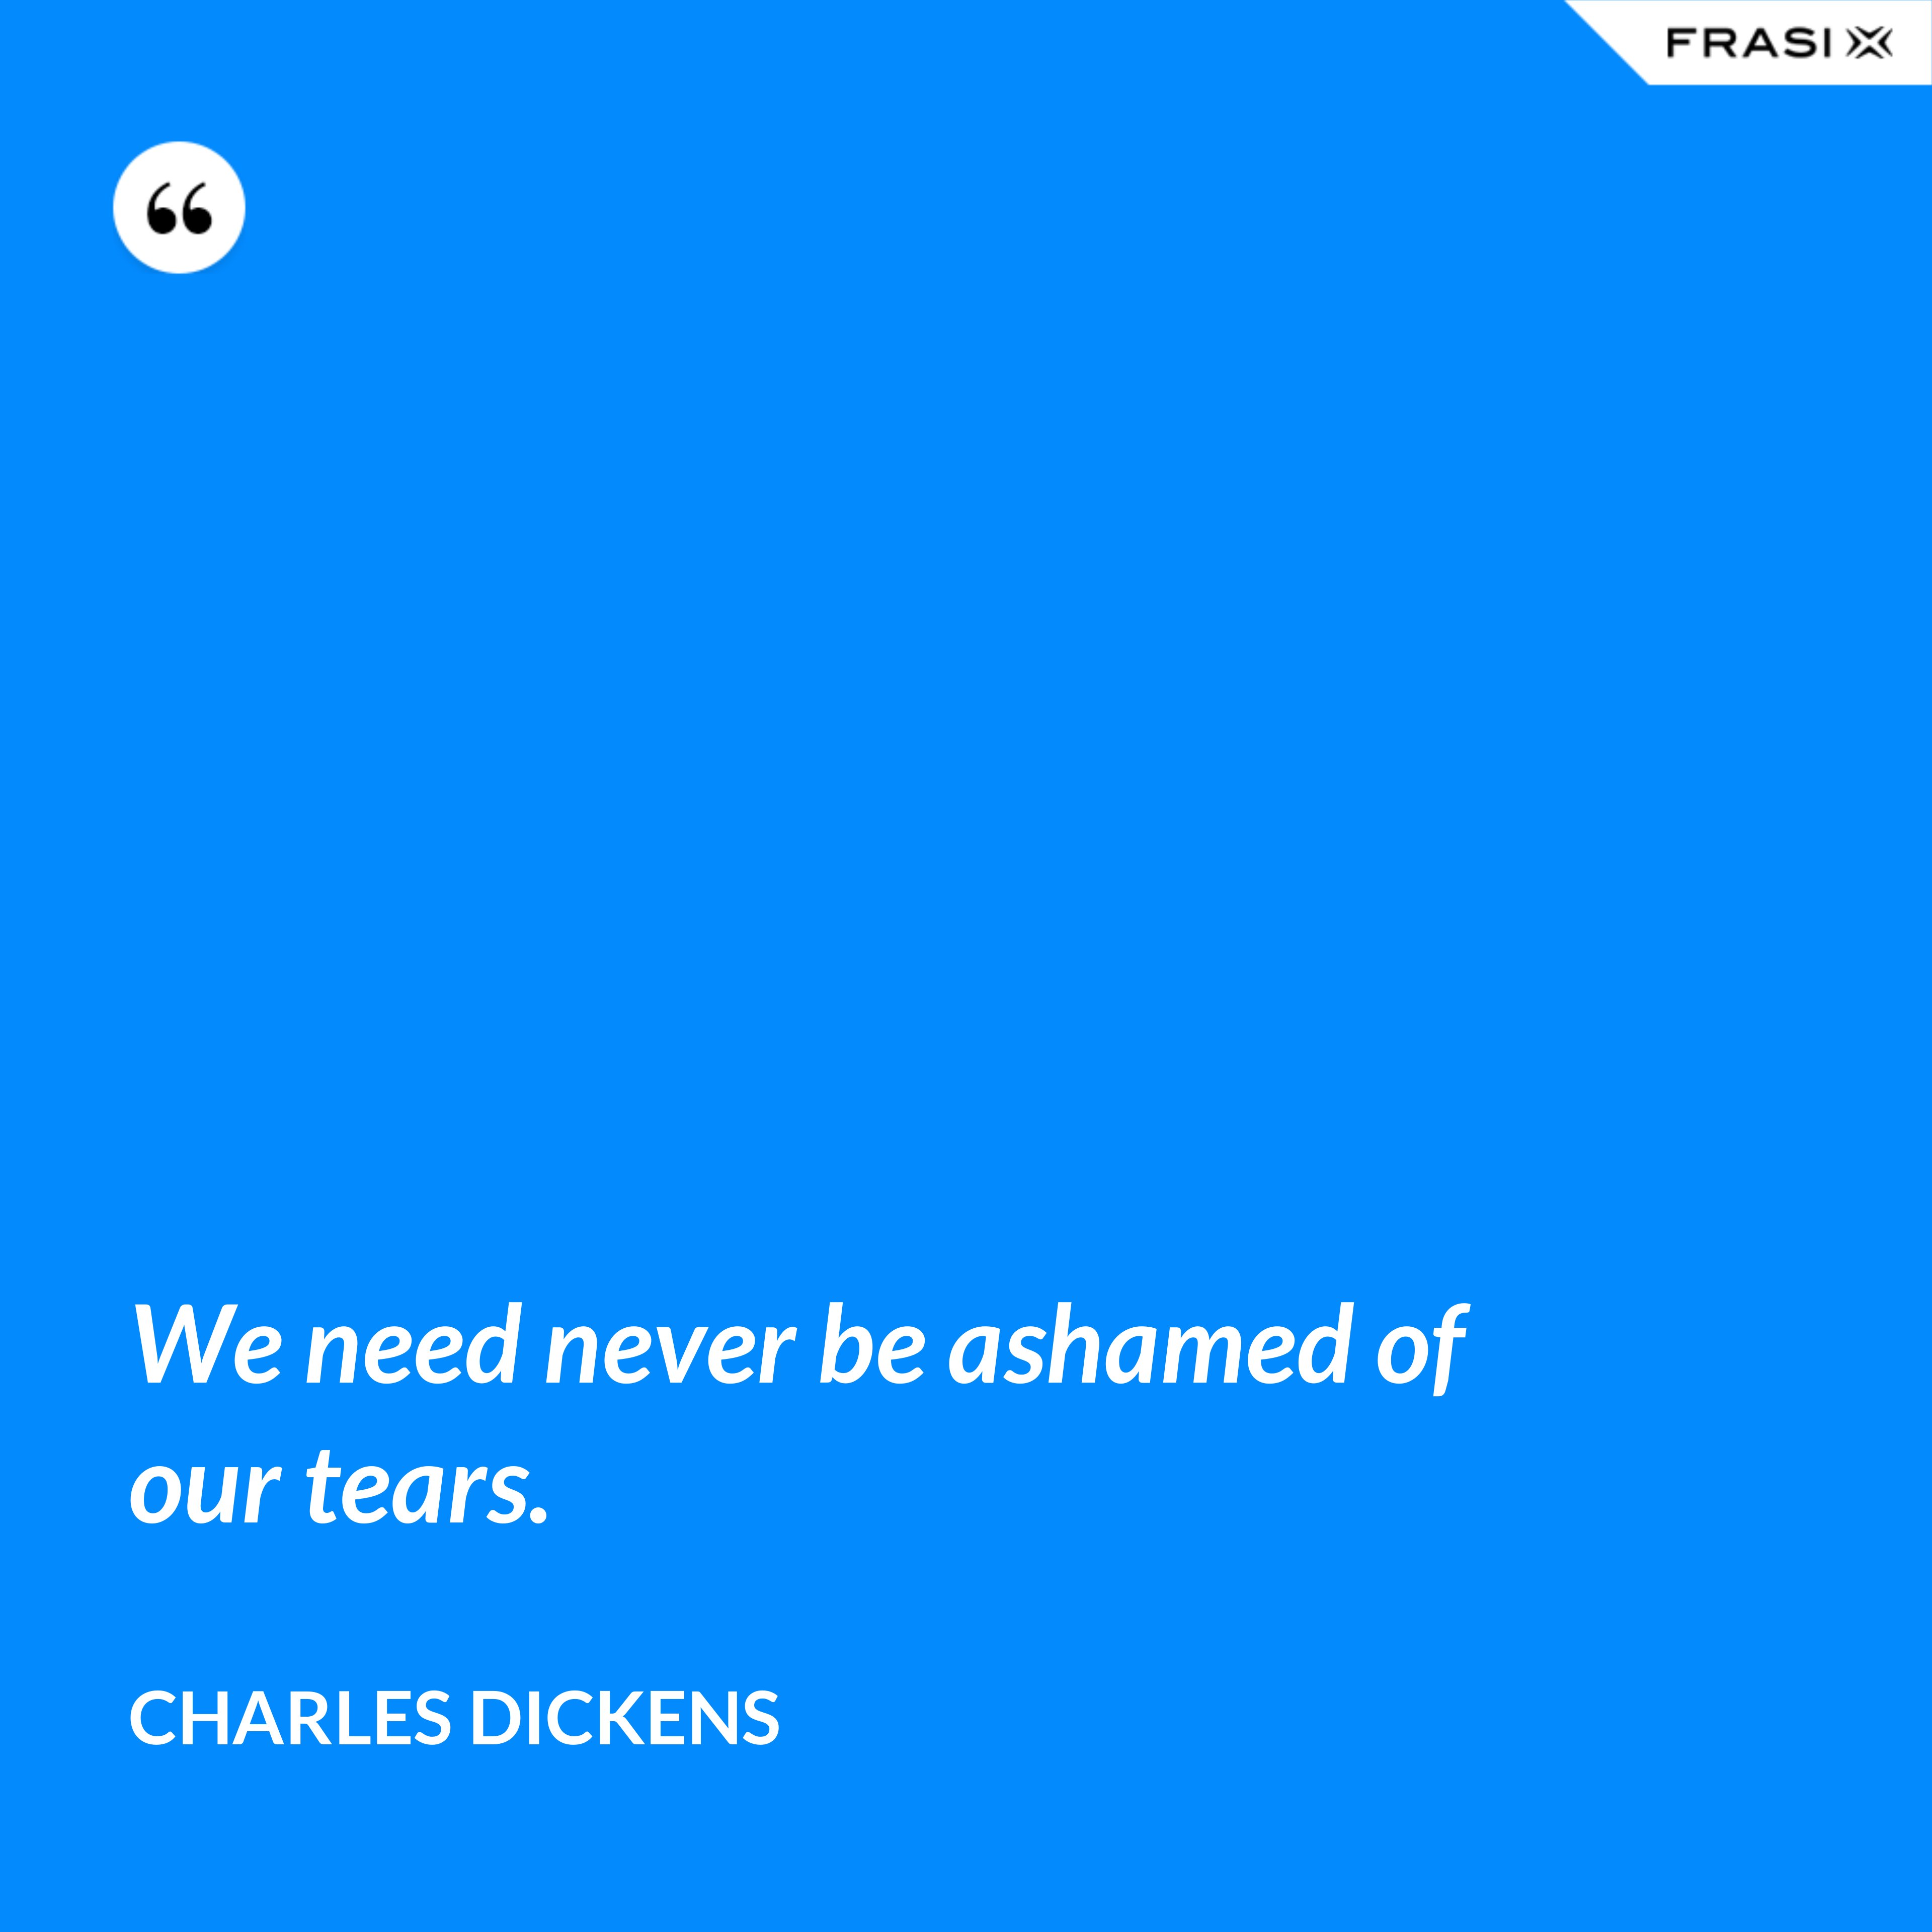 We need never be ashamed of our tears. - Charles Dickens